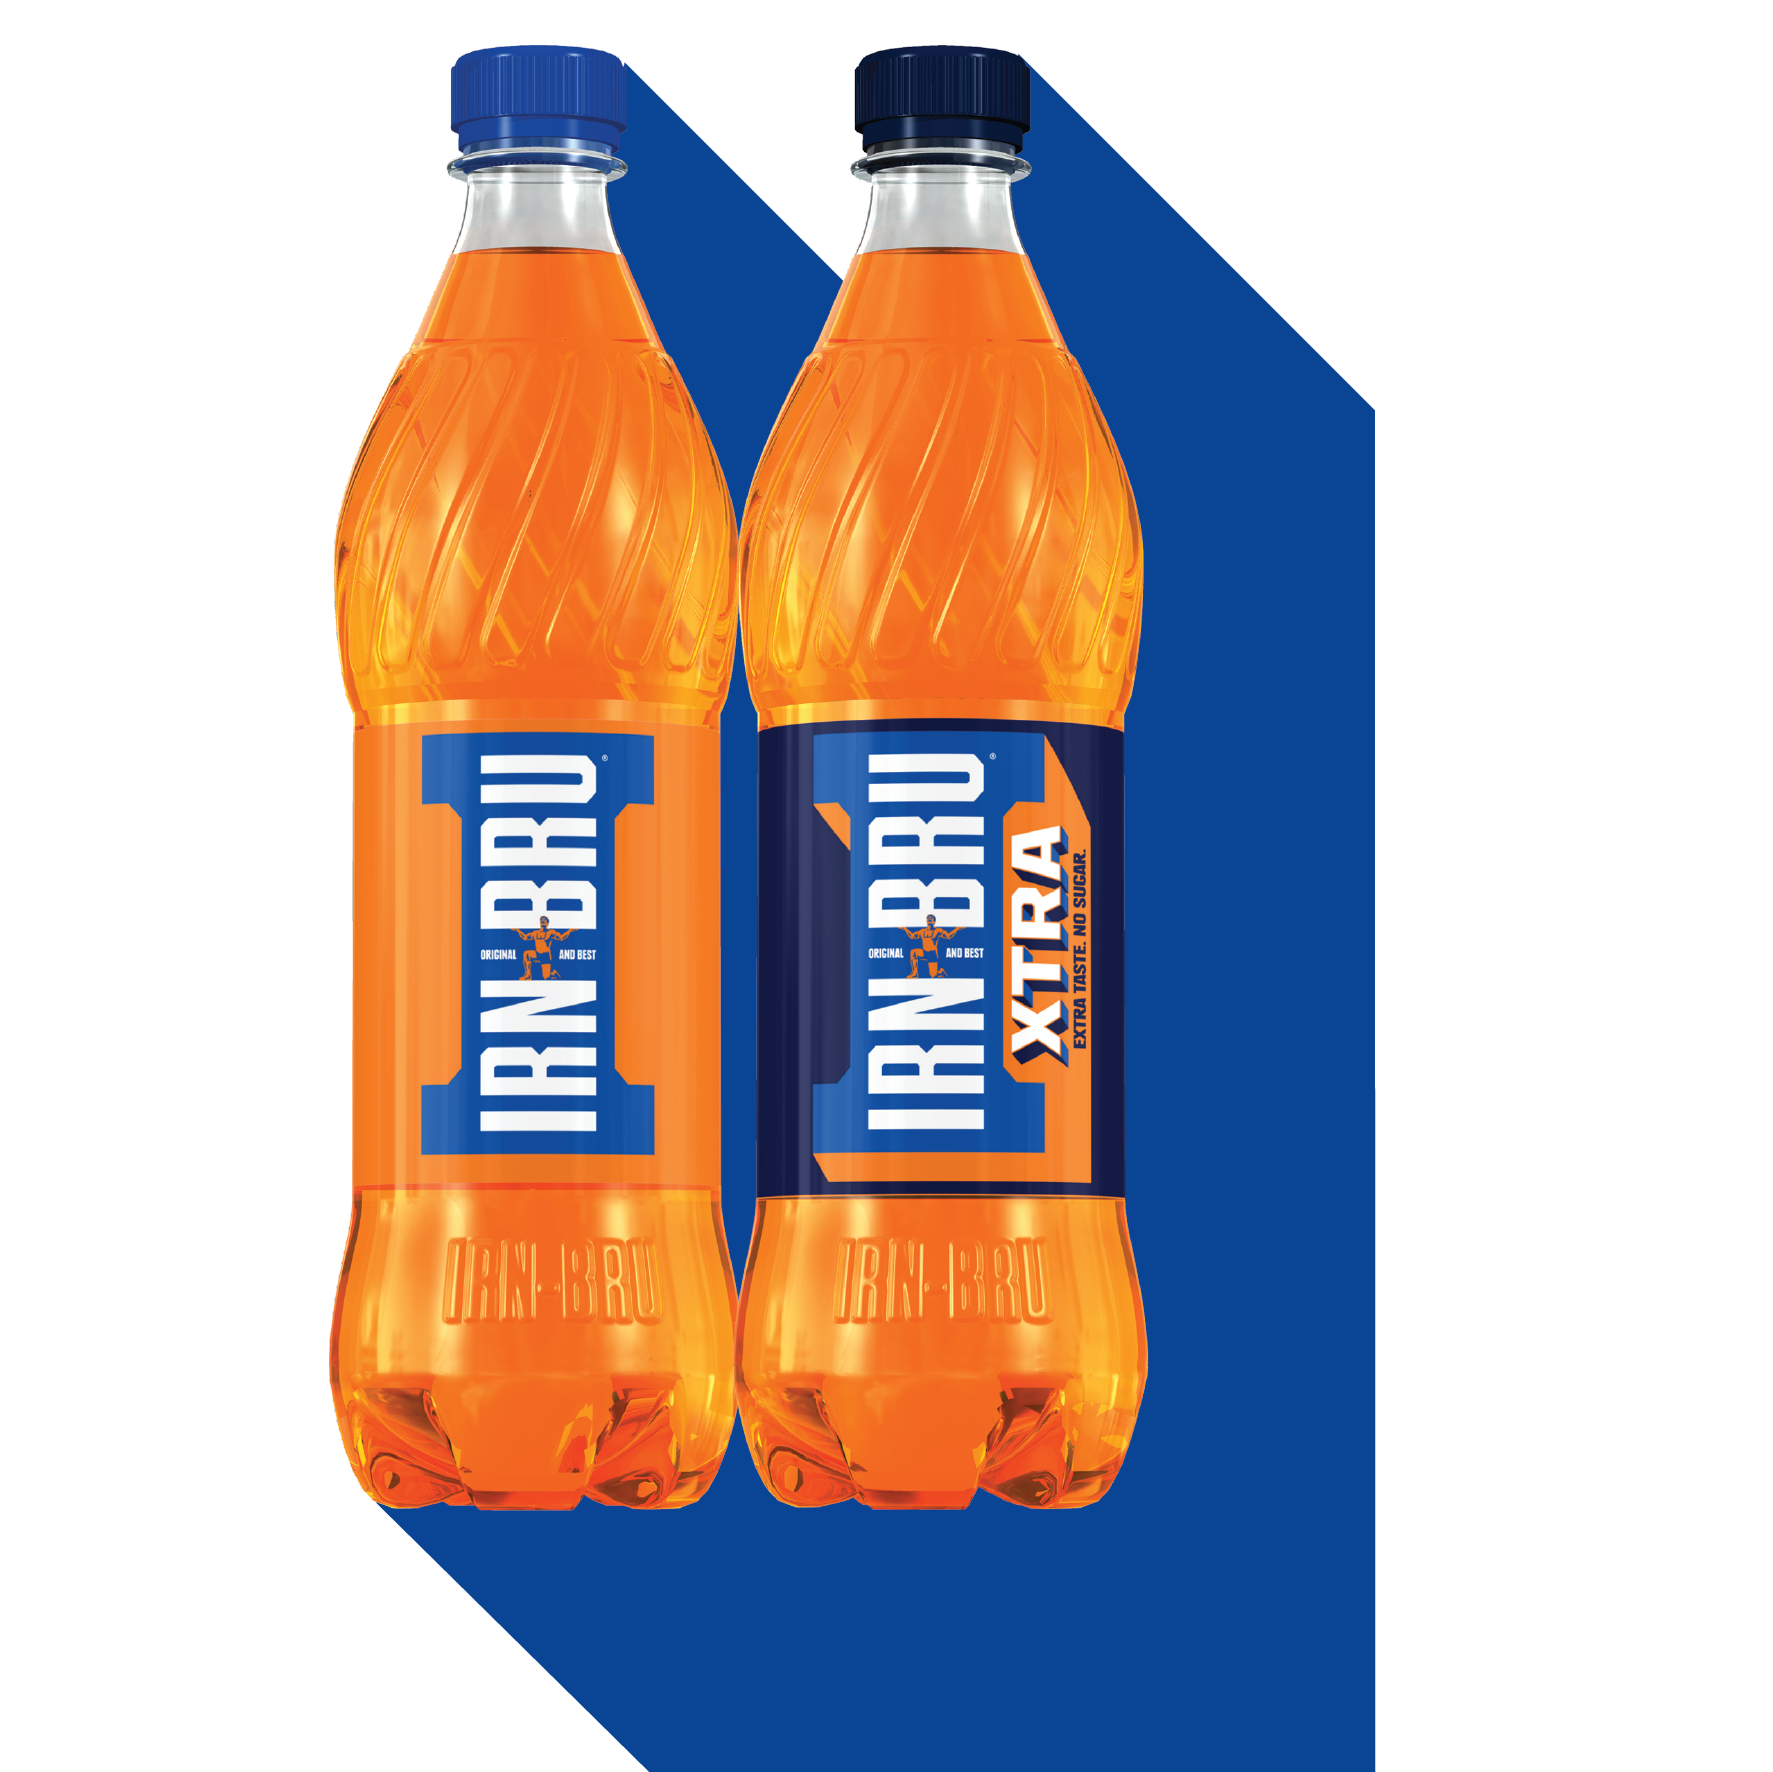 IRN-BRU set to drive incremental sales with £6m investment